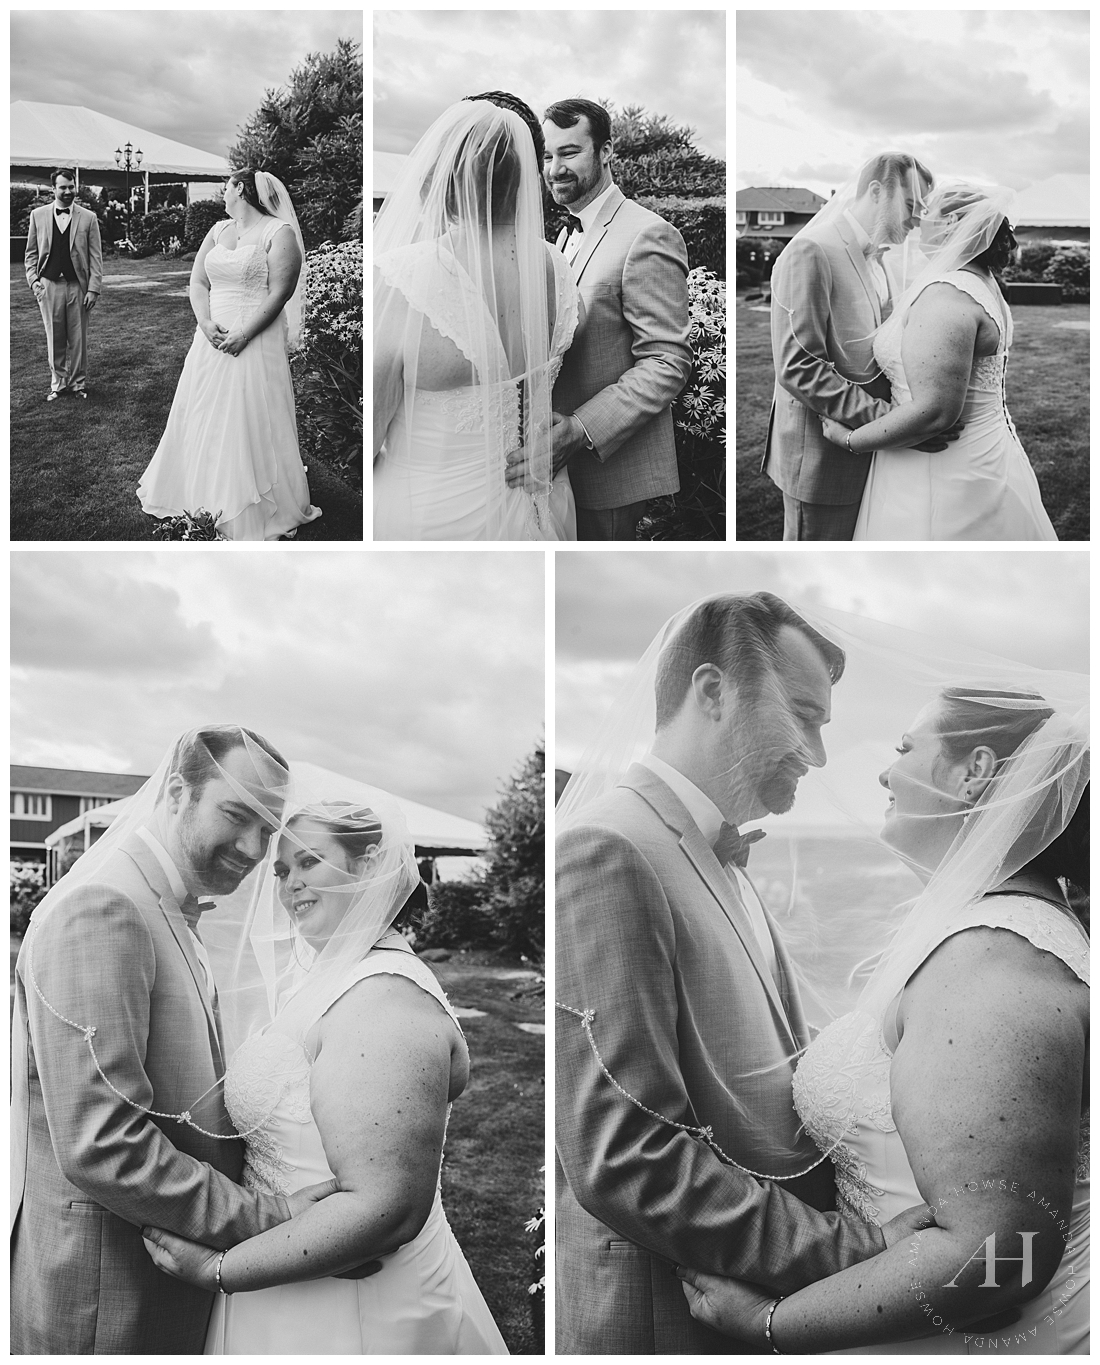 B&W Artistic Wedding Portraits in WA | Photographed by the Best Tacoma Wedding Photographer Amanda Howse Photography